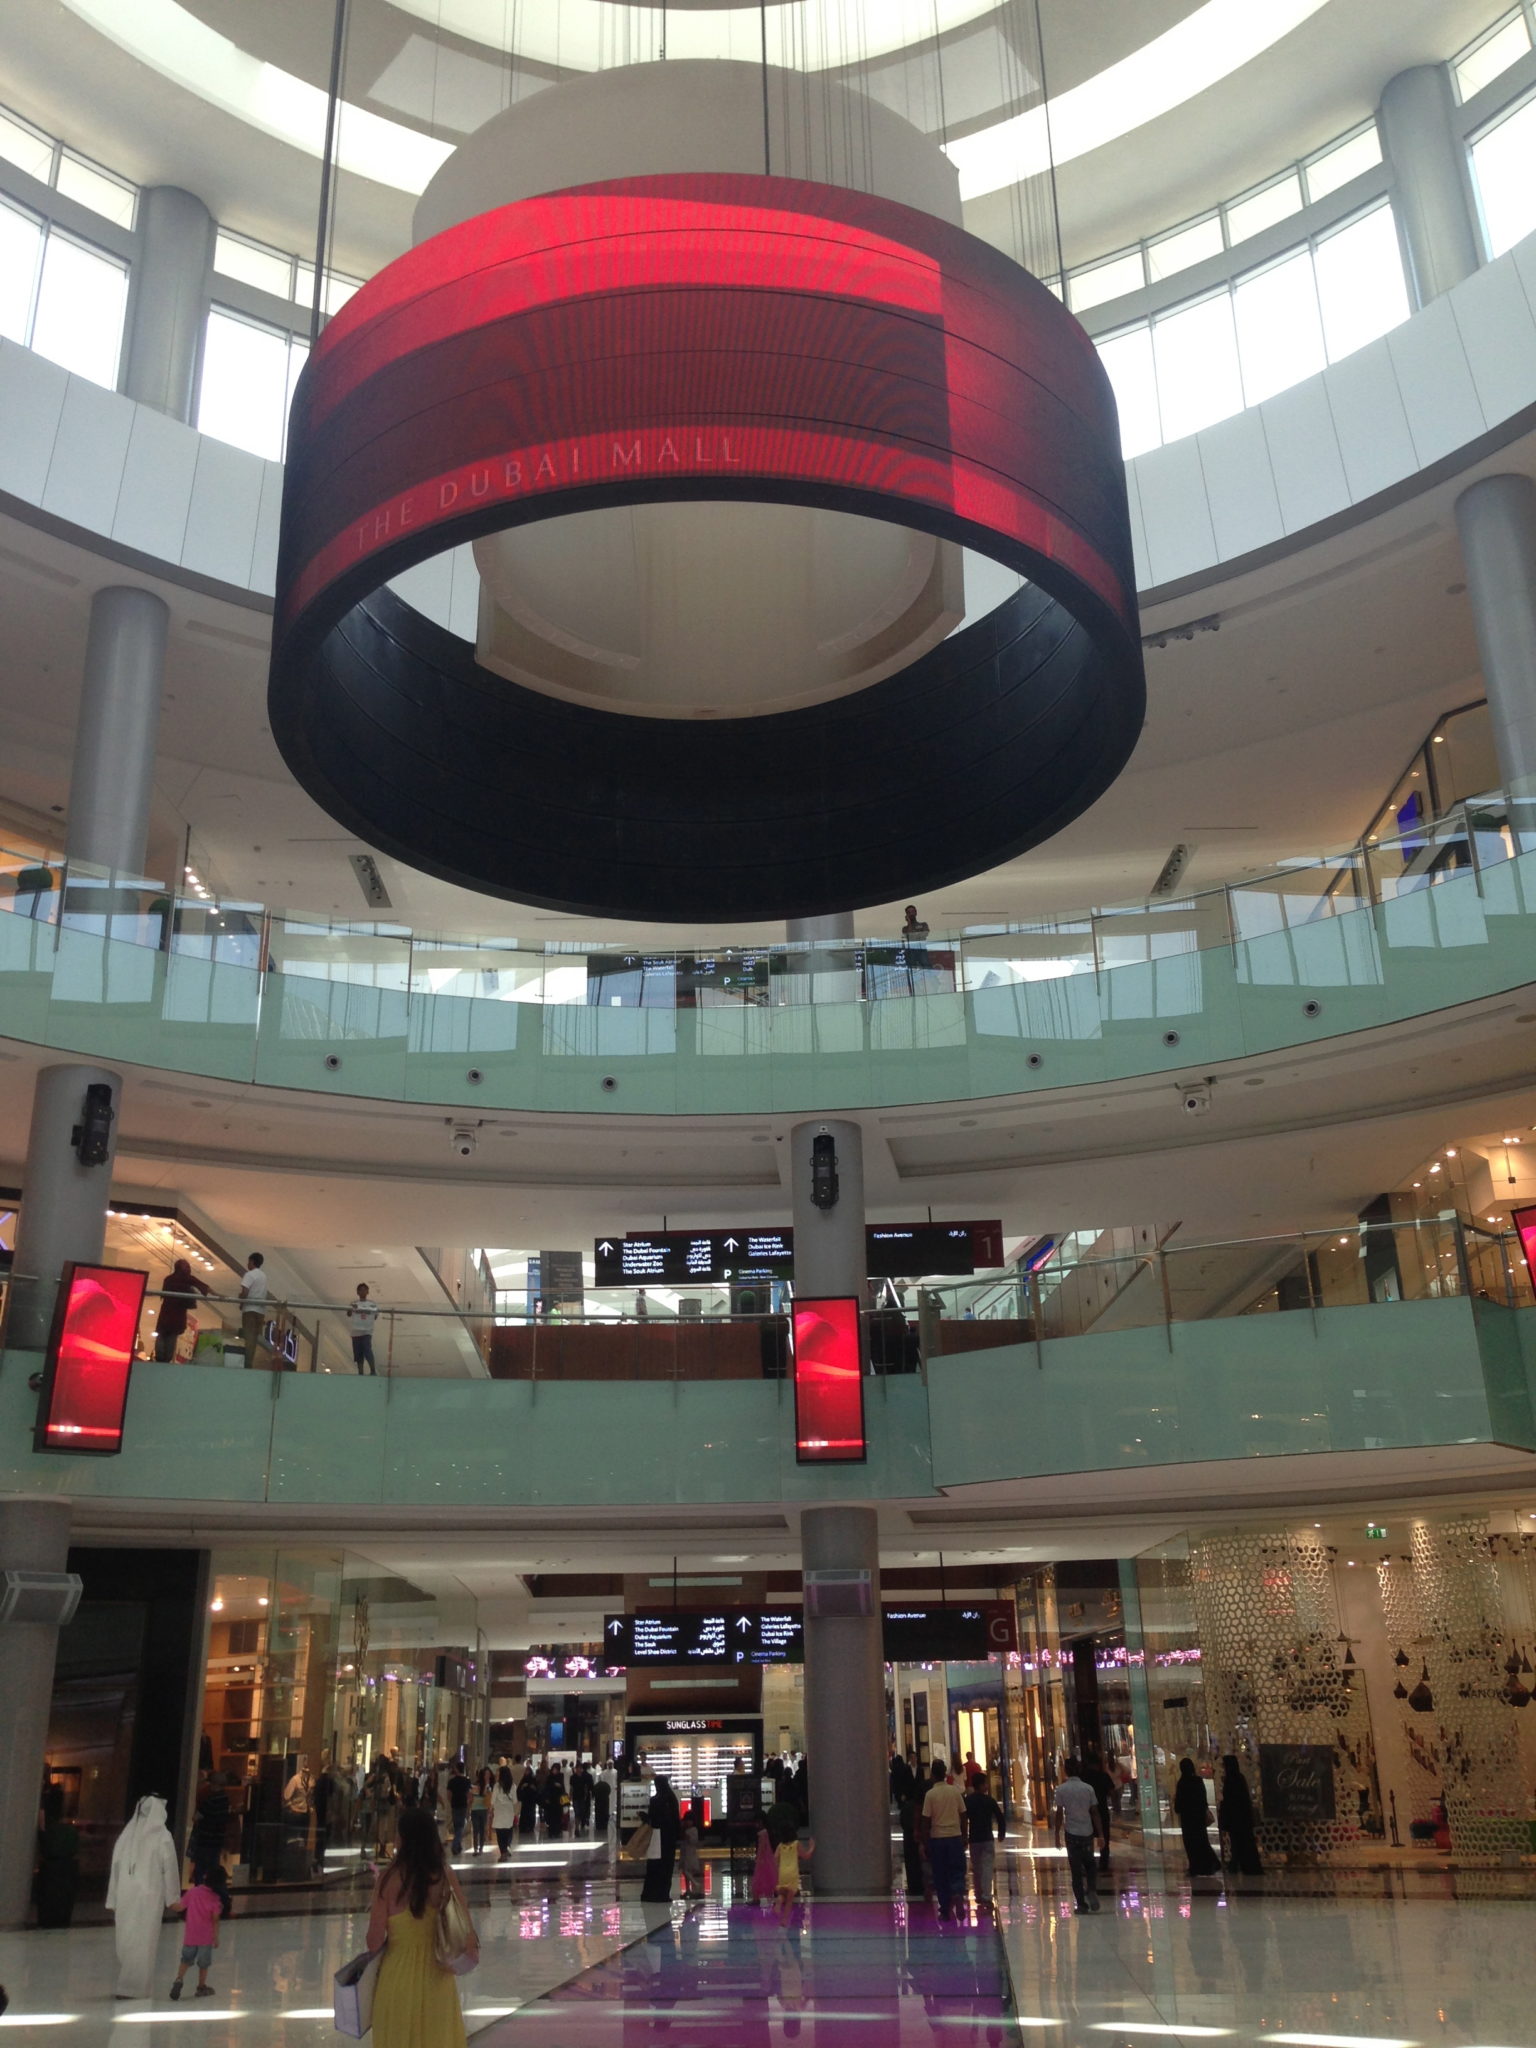 Shopping malls in the UAE, like the Dubai Mall (above), are more of an event than an outing.